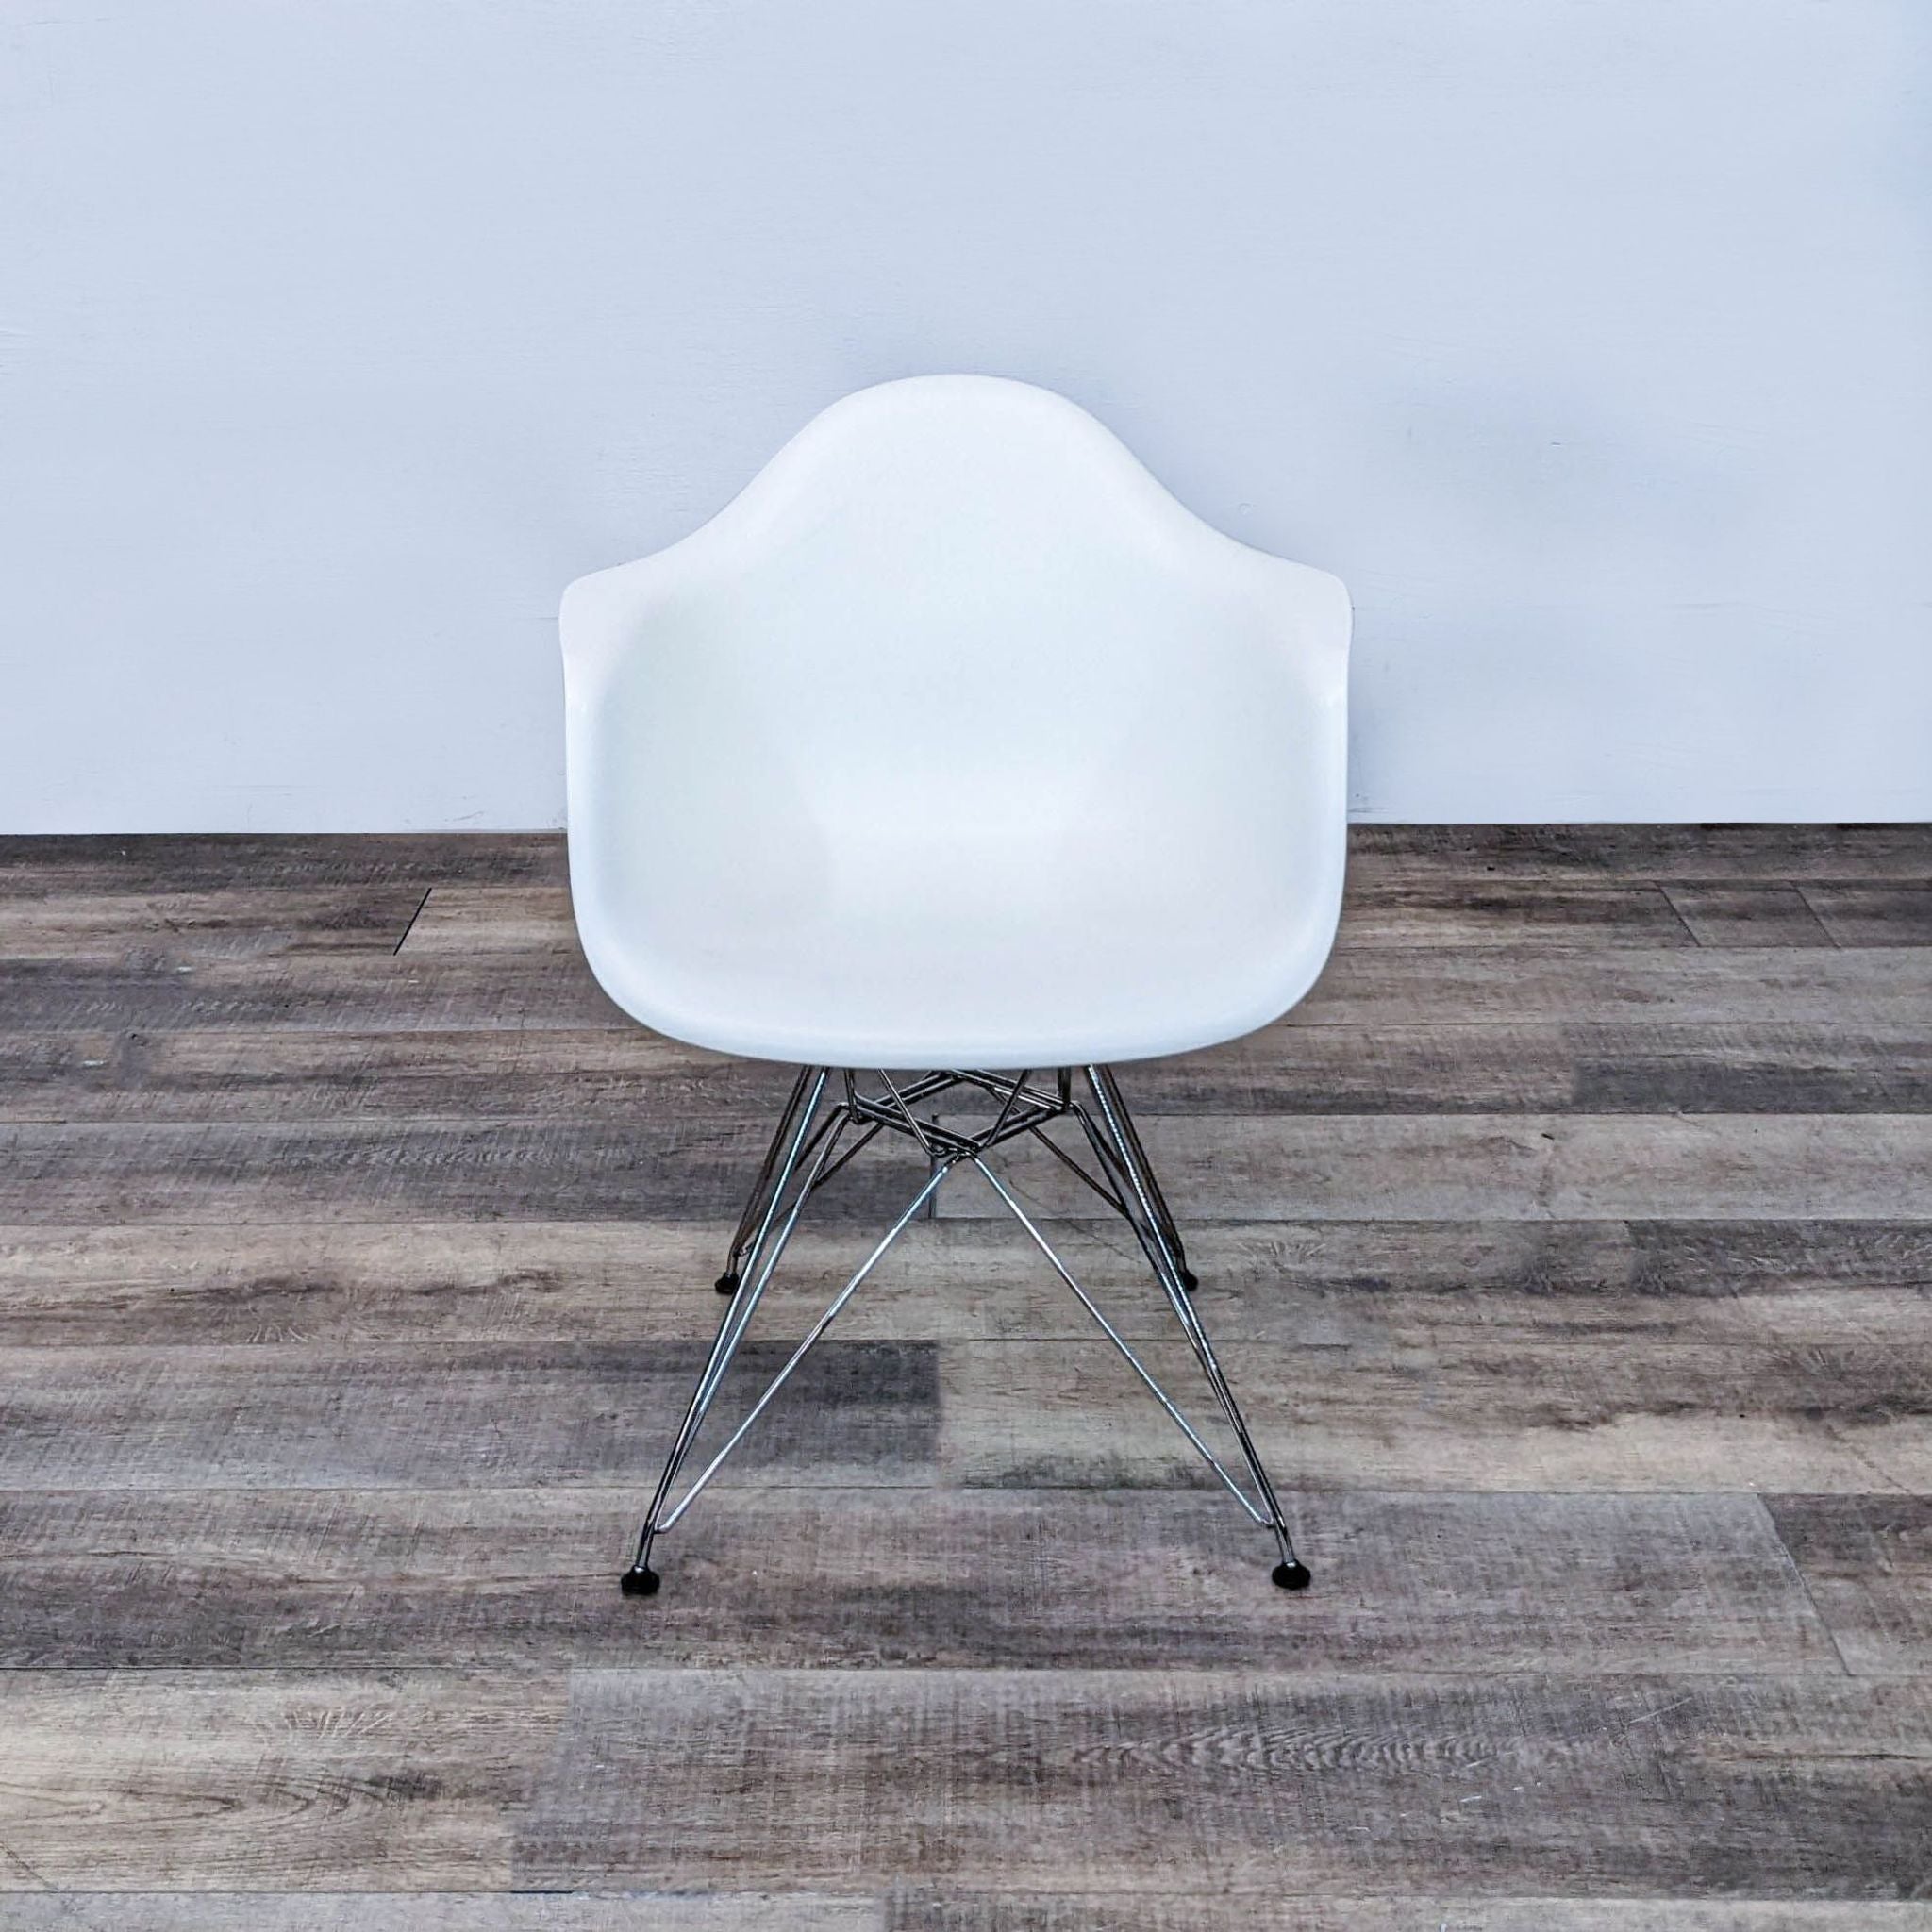 Herman Miller Eames armchair with white plastic seat and chrome Eiffel base on wood floor, facing forward.